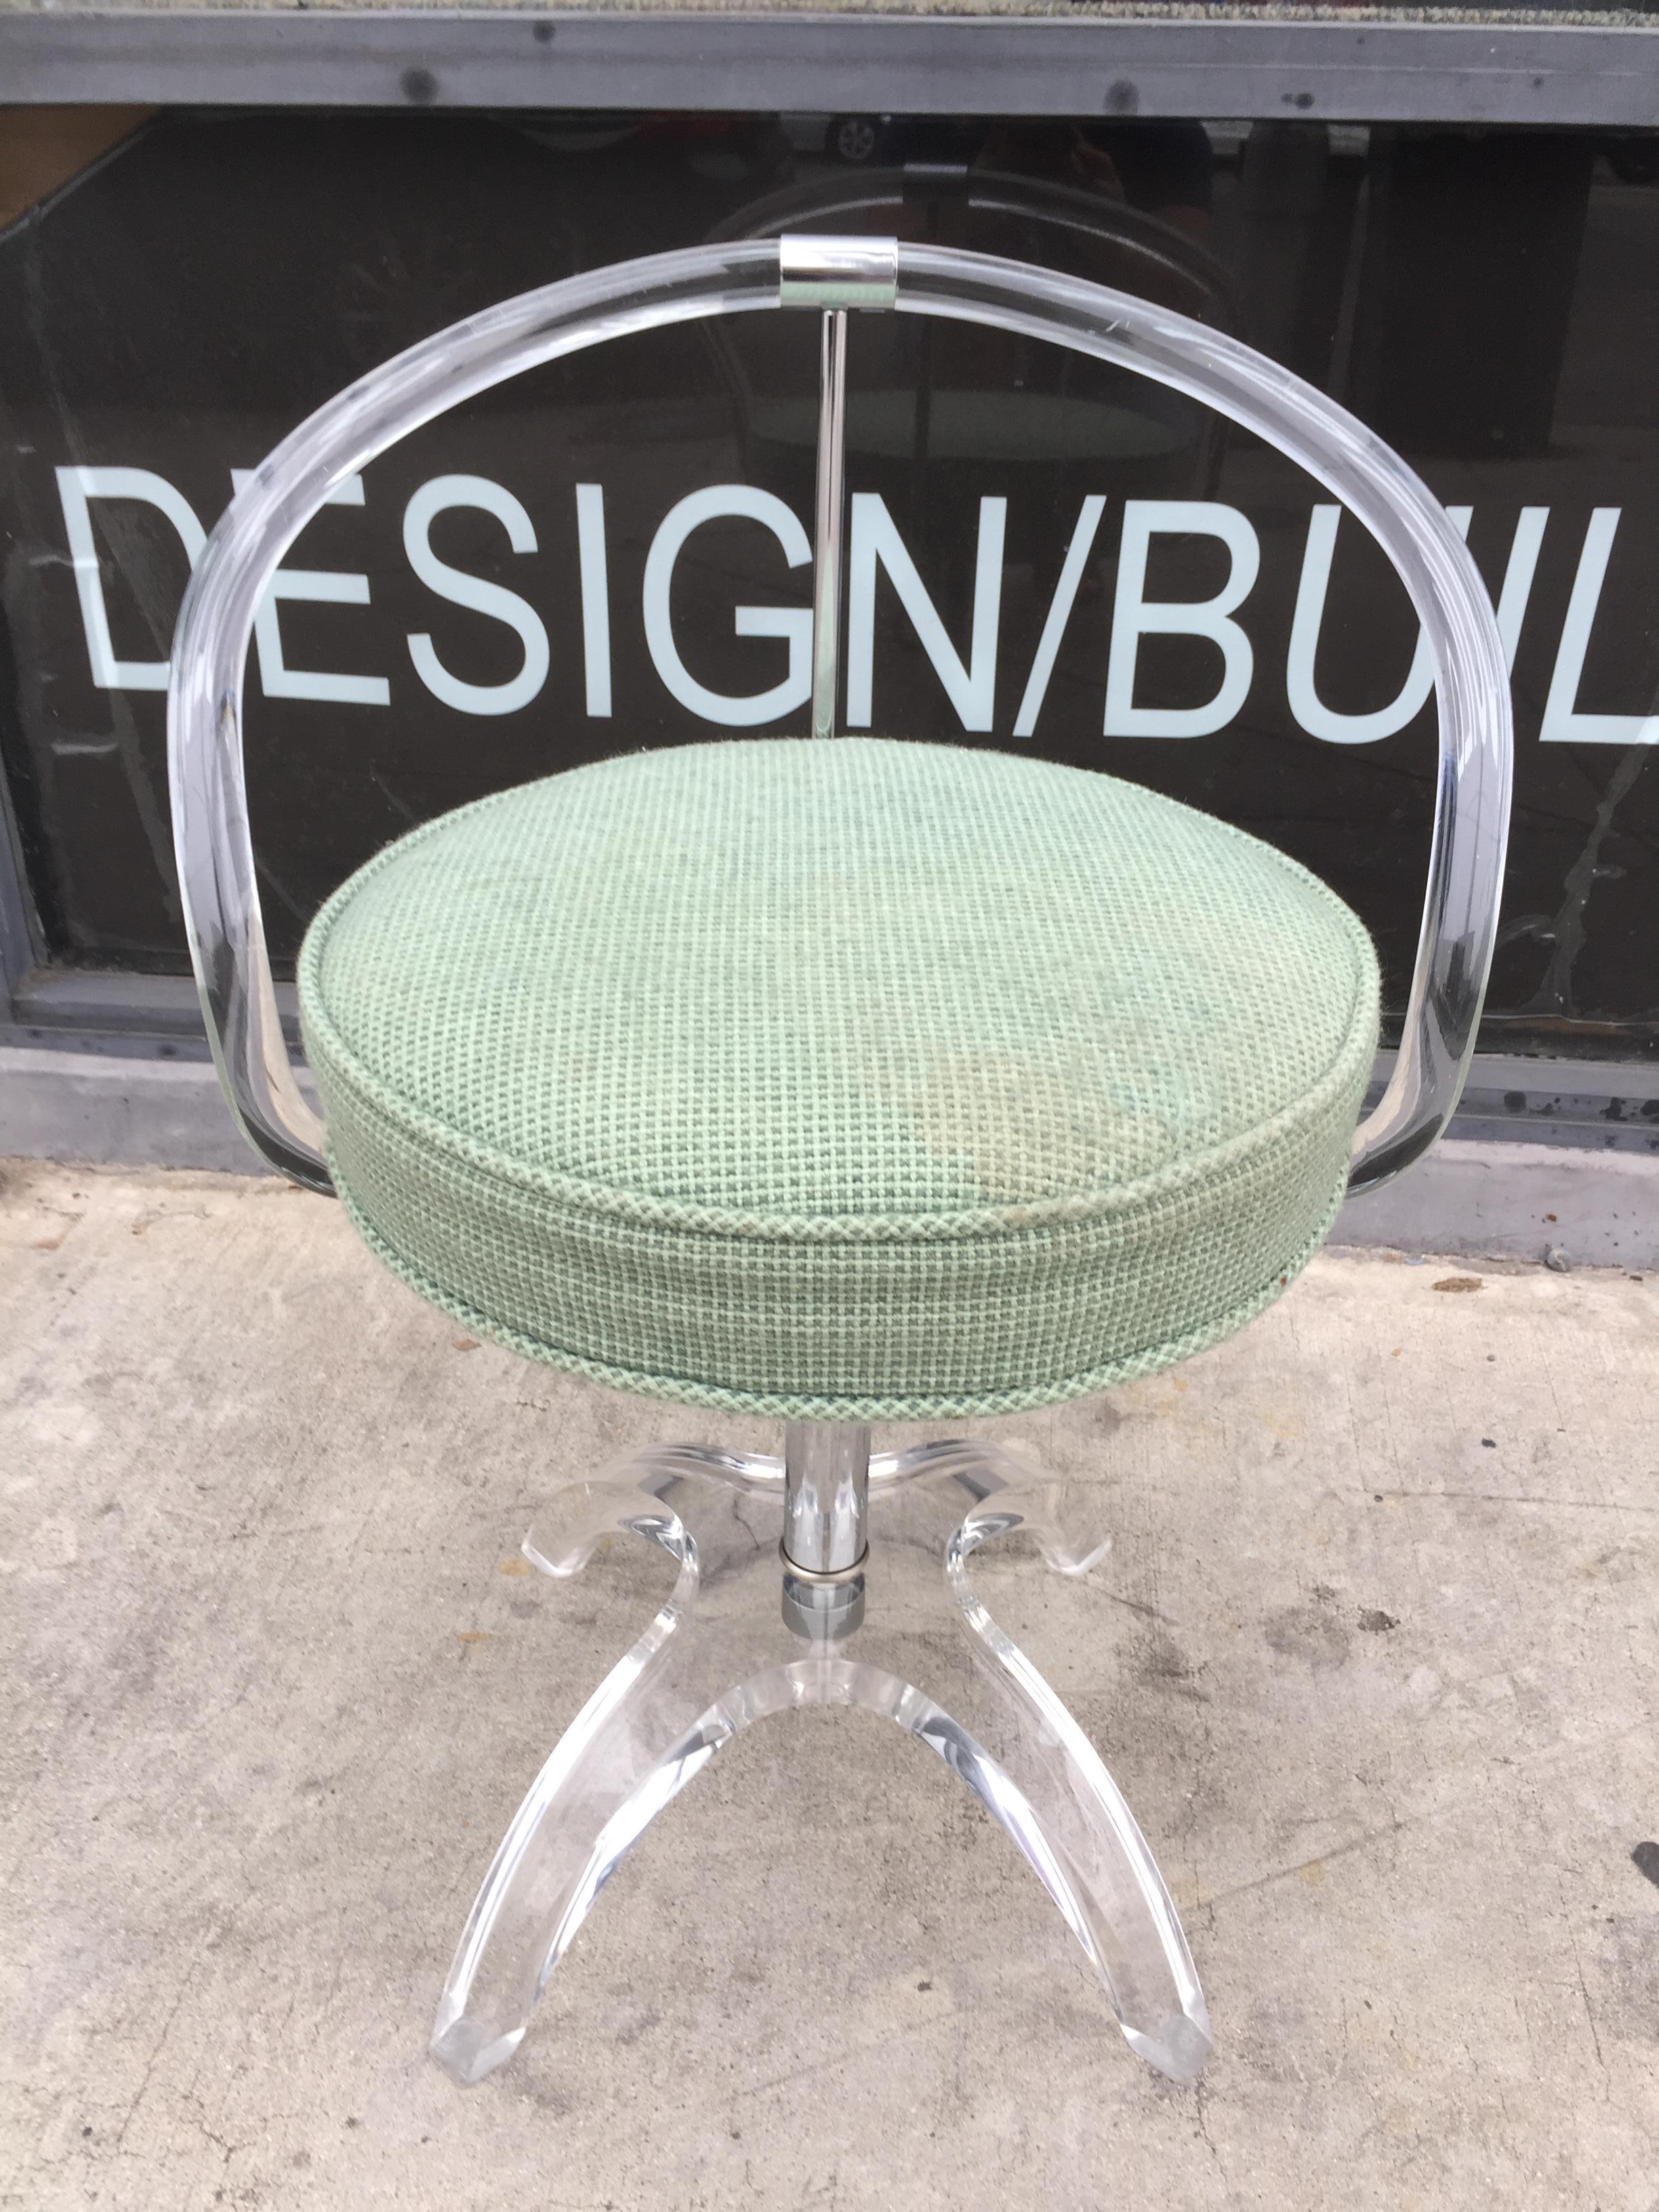 Mid-Century Modern Lucite and Nickel Vanity Swivel Chair by Charles Hollis Jones, Signed and Dated